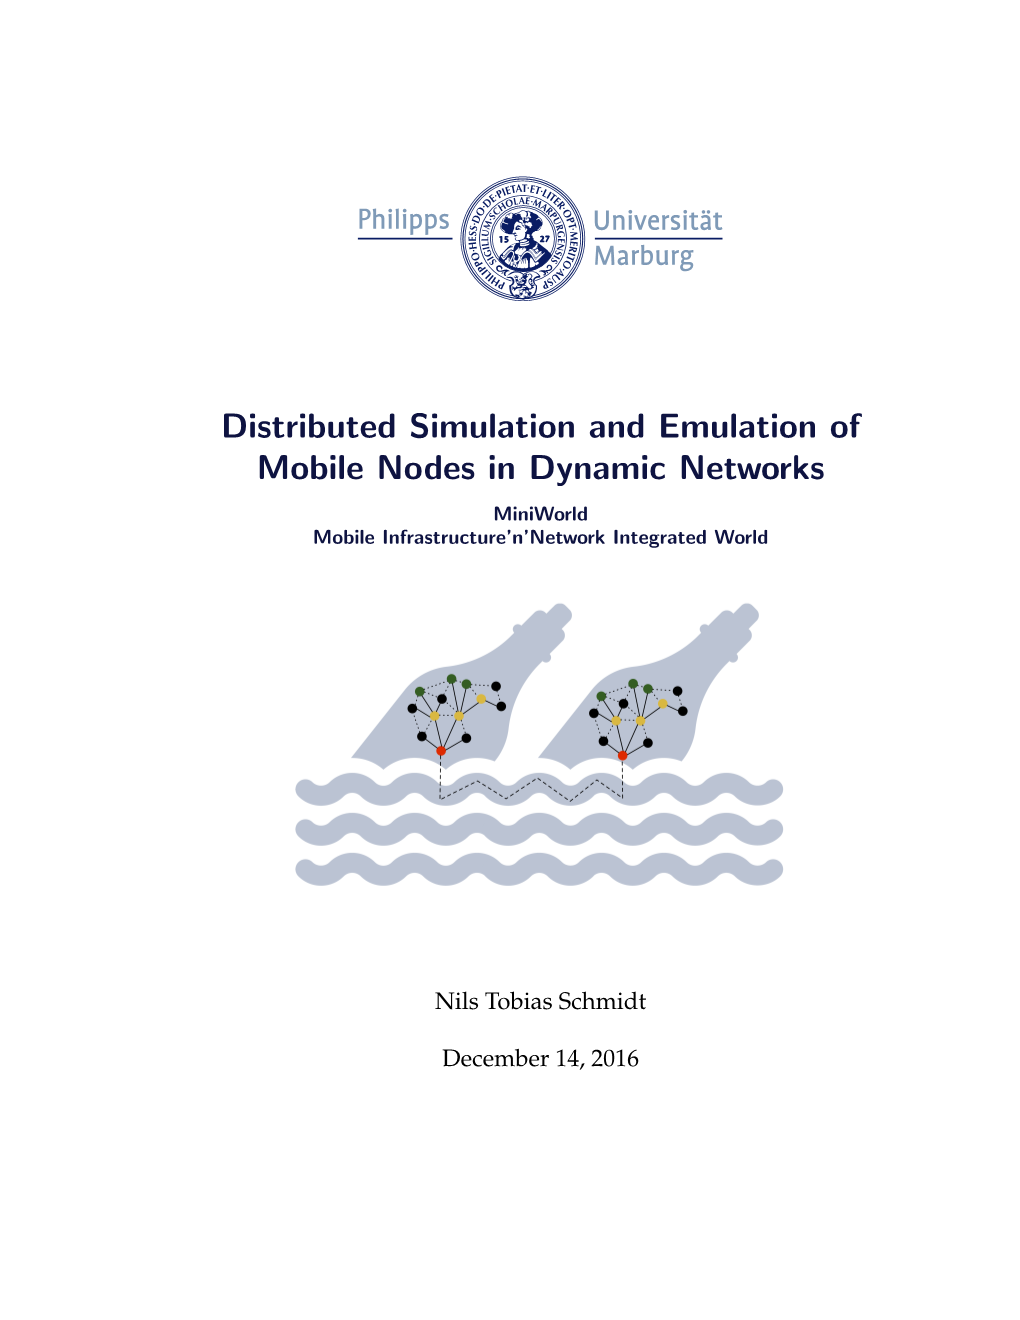 Distributed Simulation and Emulation of Mobile Nodes in Dynamic Networks Miniworld Mobile Infrastructure’N’Network Integrated World